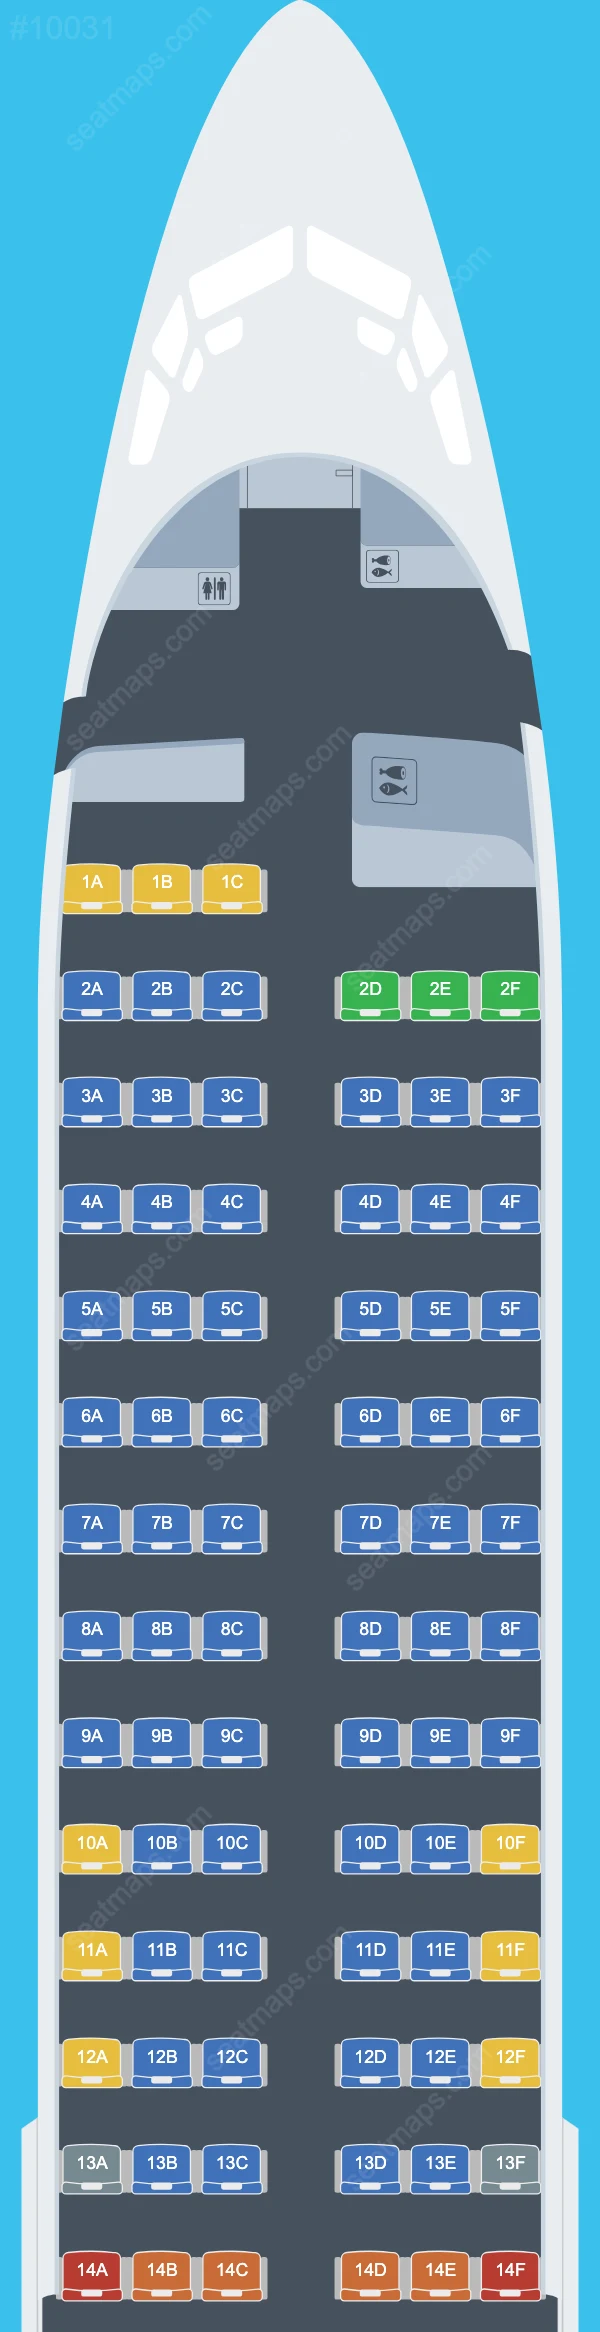 Bees Airline Boeing 737 Seat Maps 737-800